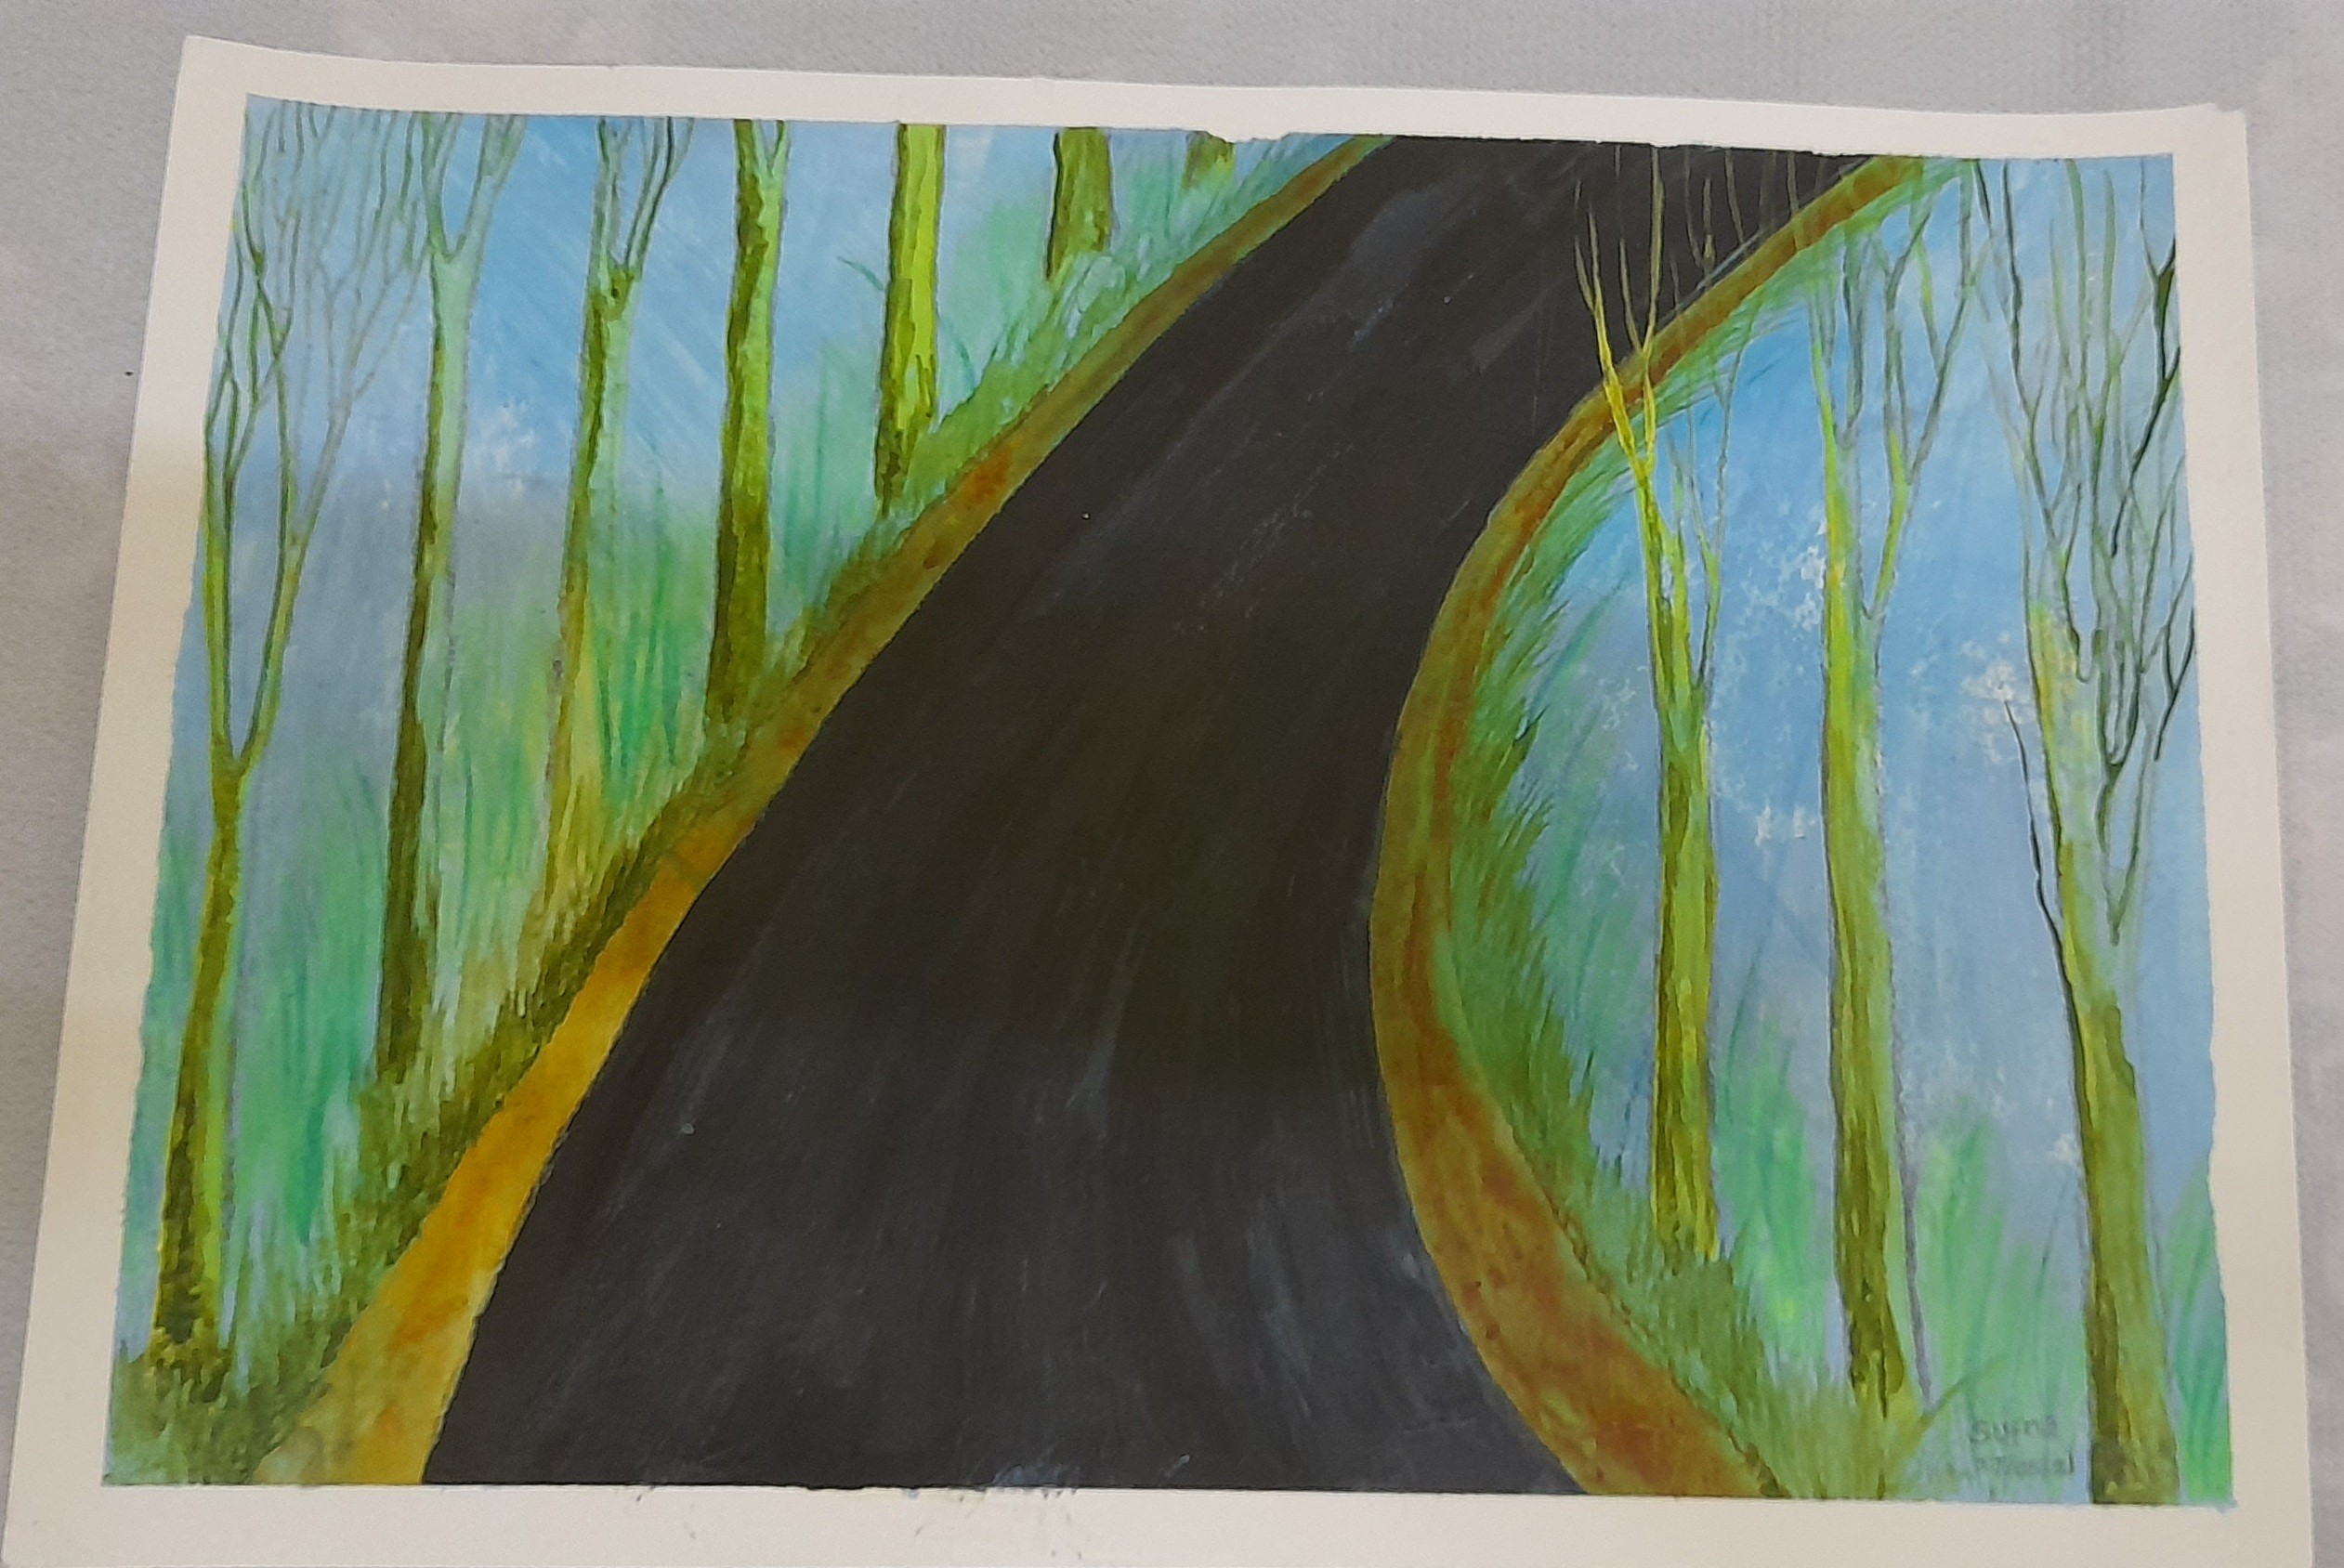 The Hilly Road by Sufna Noor